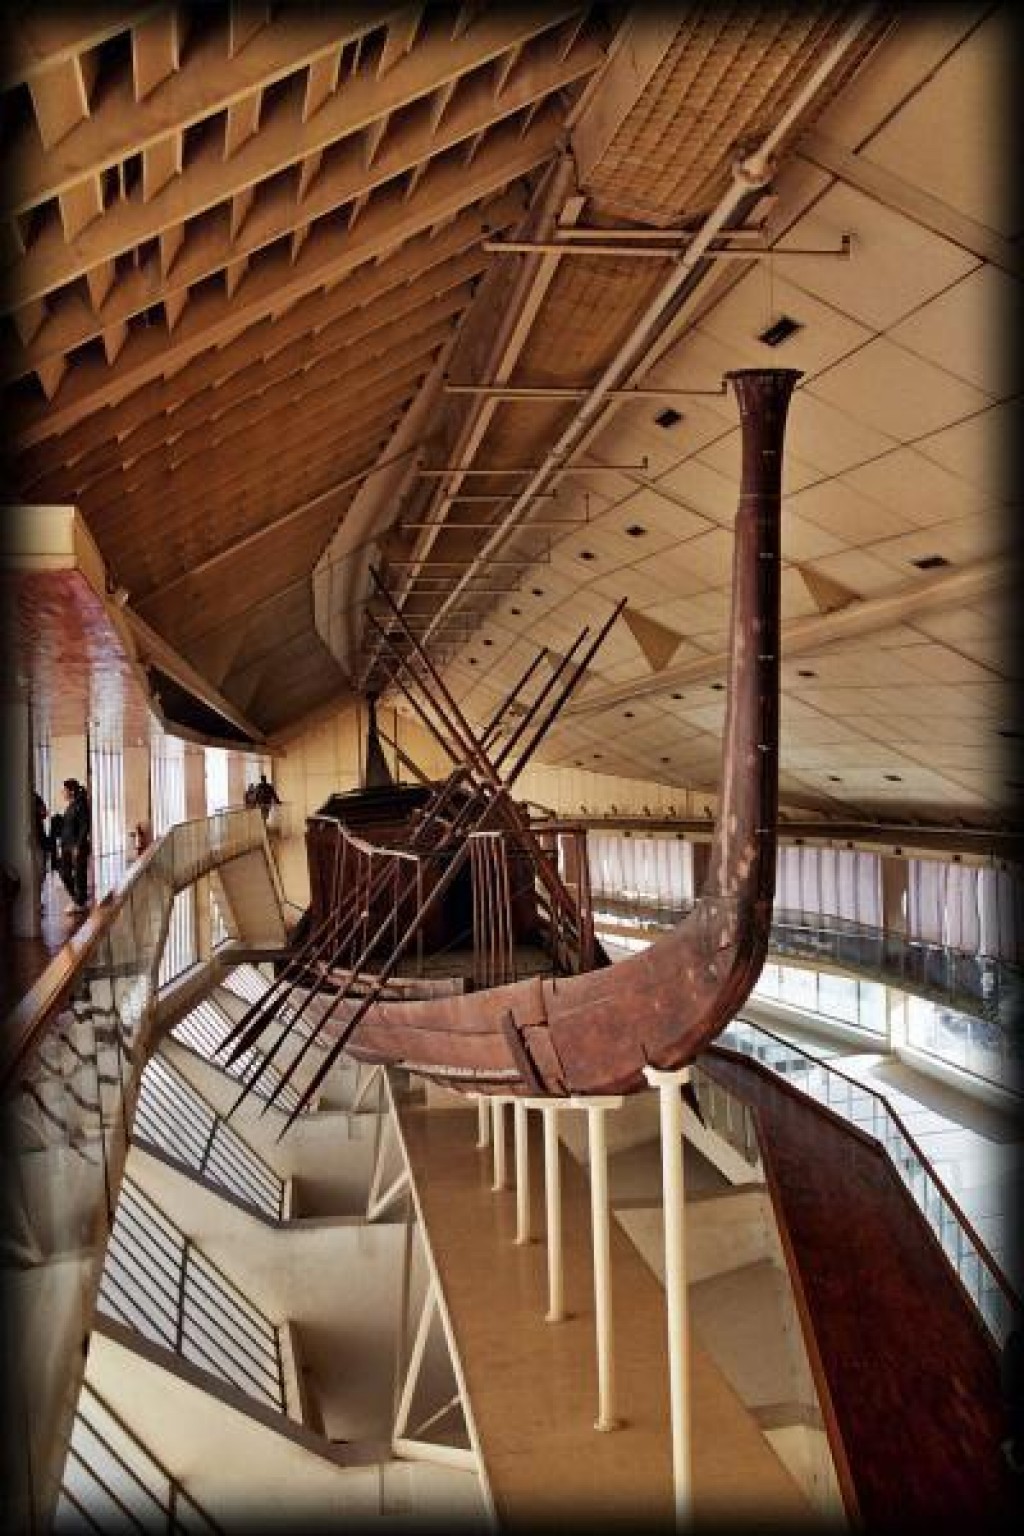 These boats were intended to have been used to transport Khufu's body and all his possessions to the after-life.